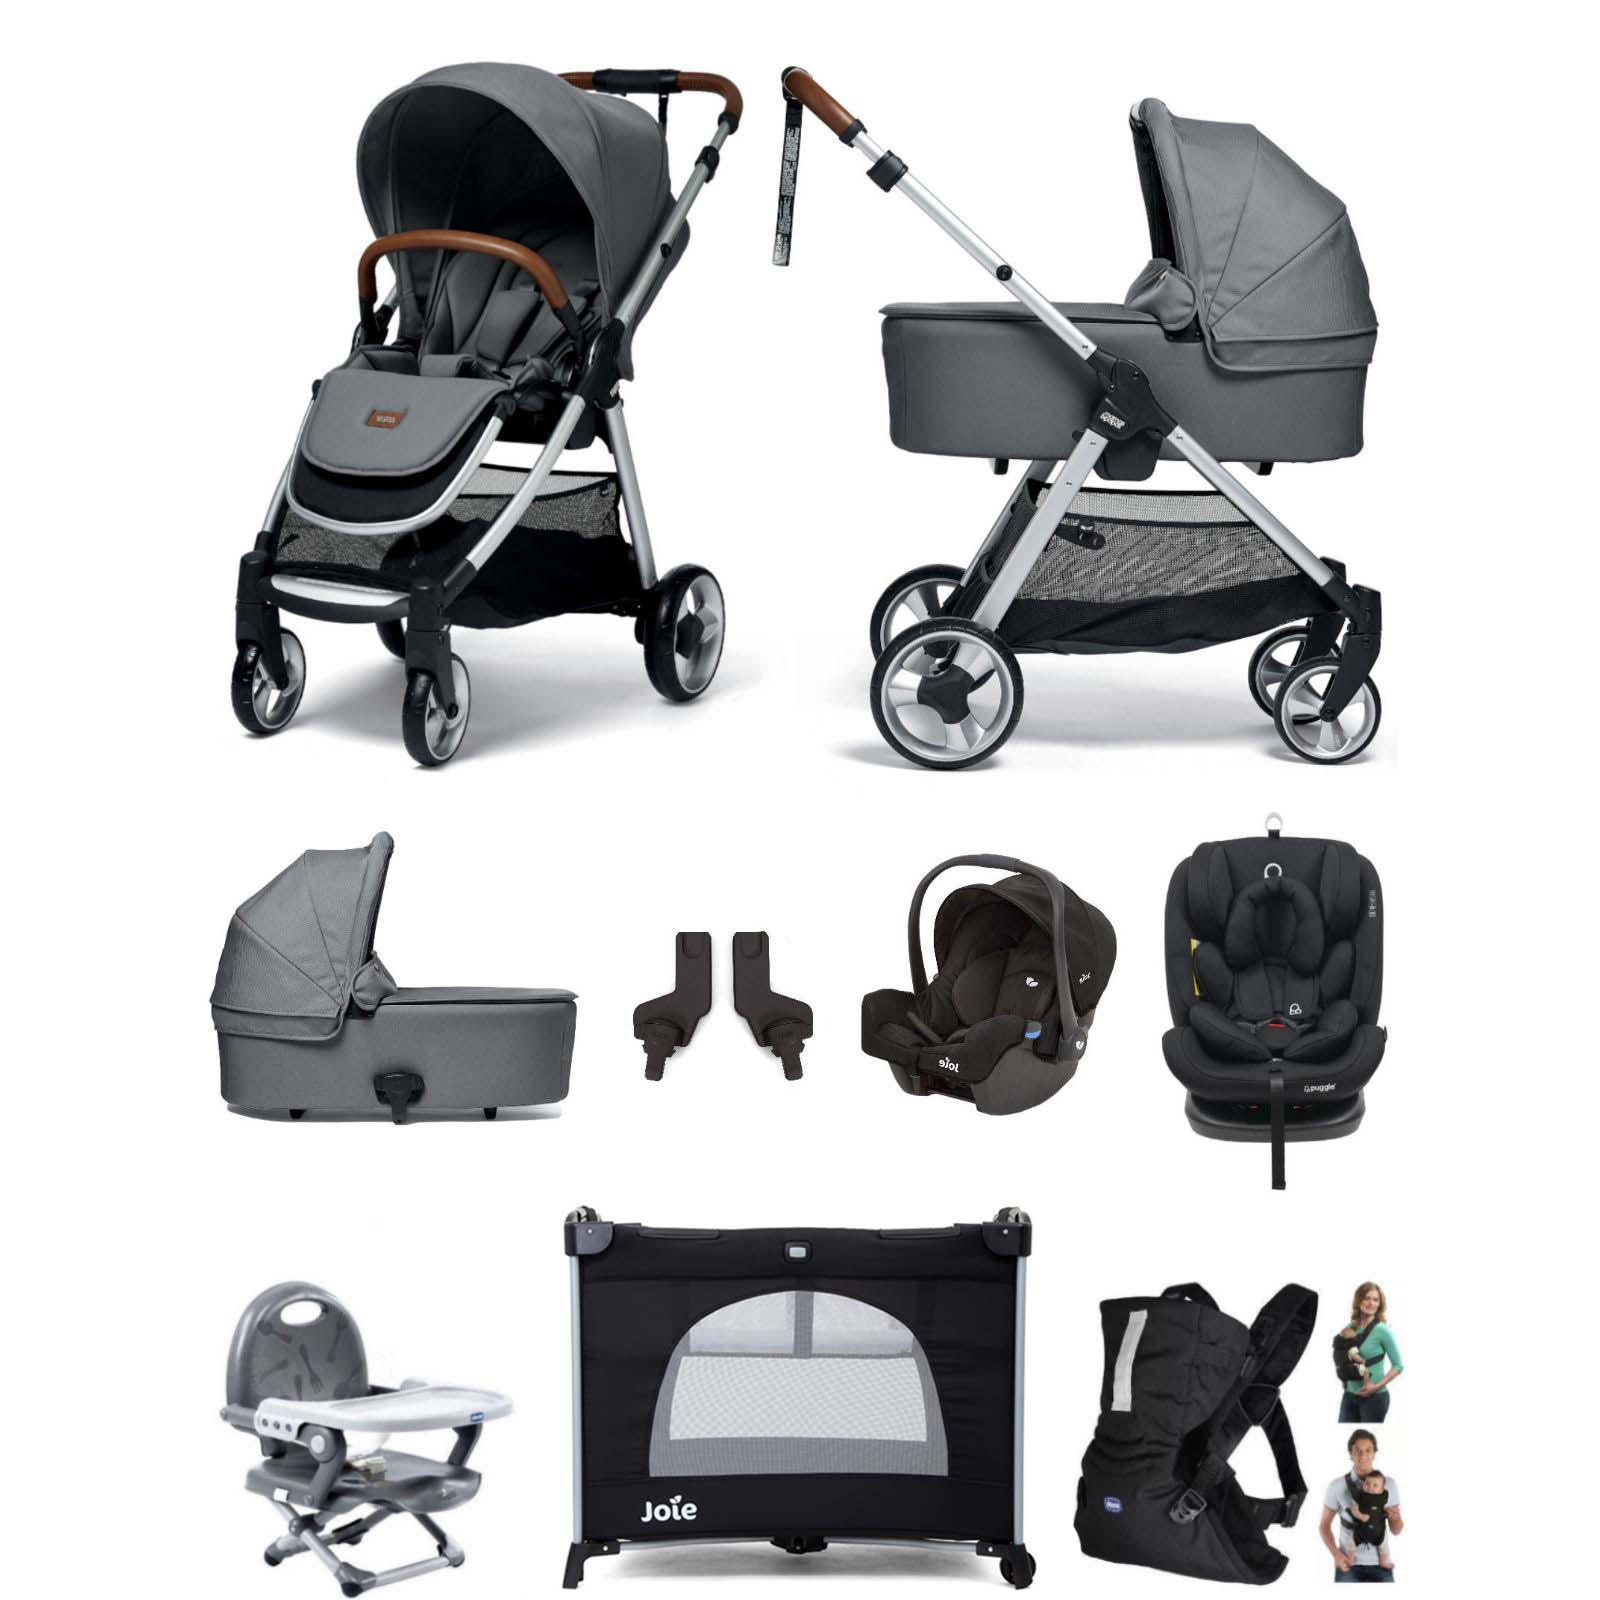 Mamas & Papas Flip XT2 9pc (Gemm 0+ + Lockton 0+123 Car Seat) Everything You Need Travel System Bundle with Carrycot - Fossil Grey